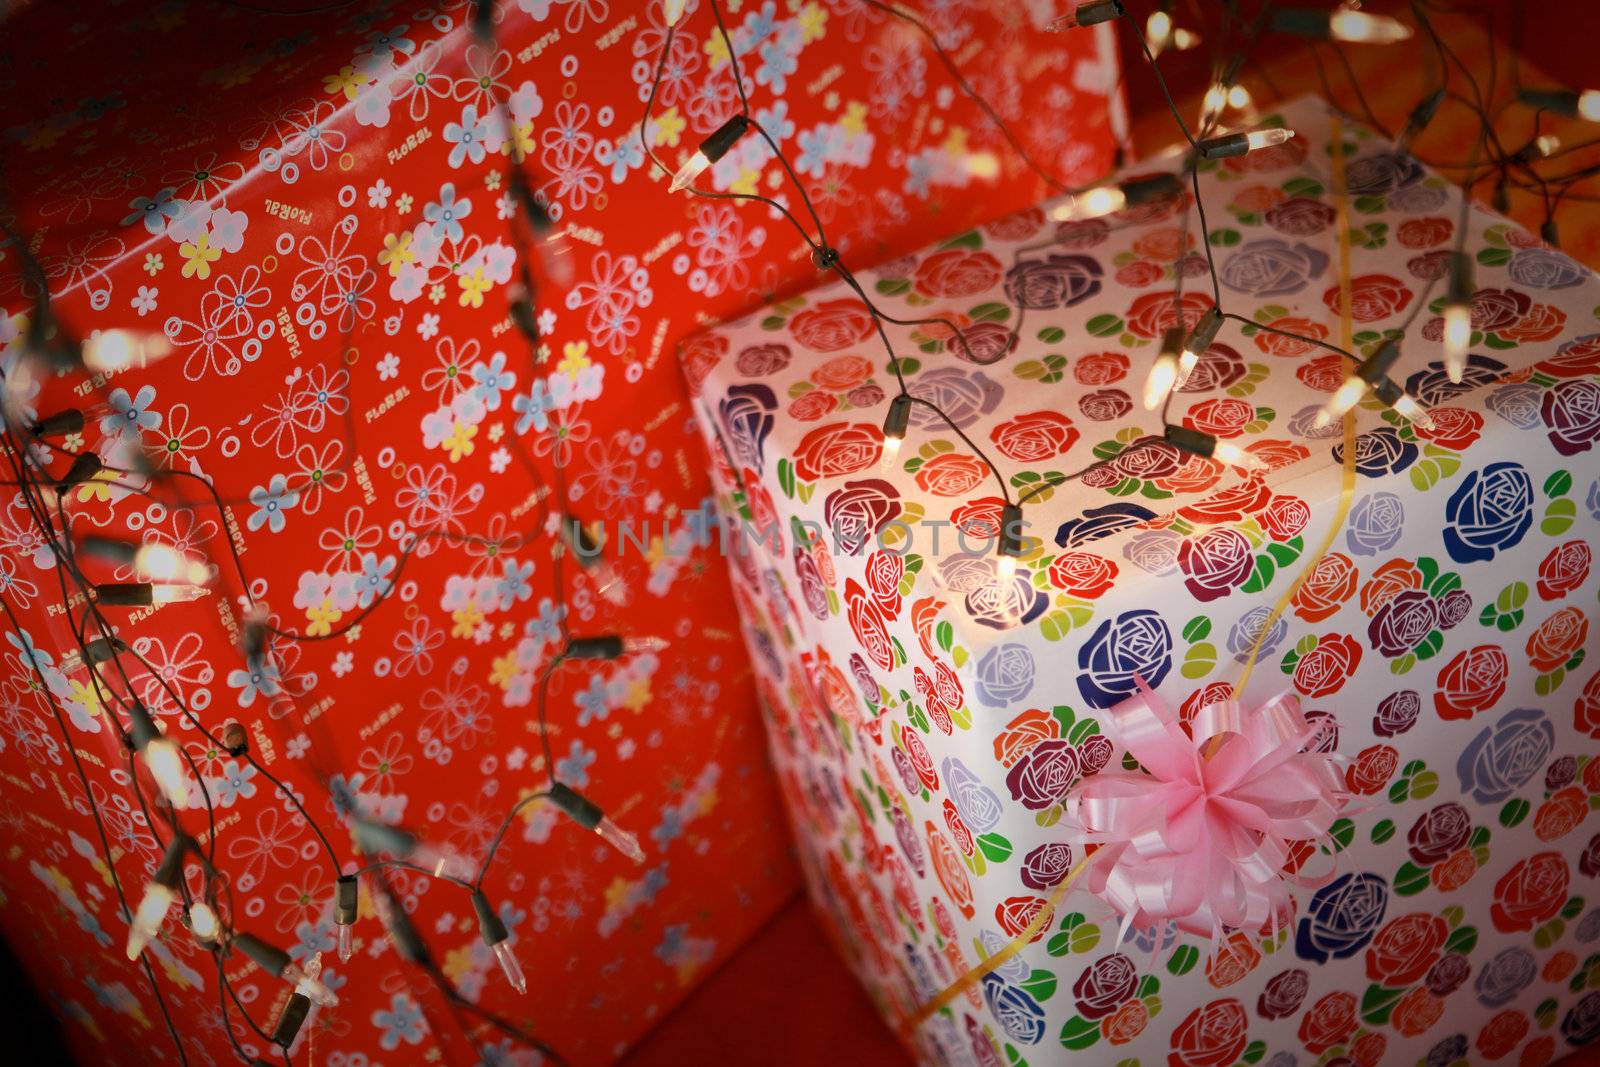 Boxed Christmas gifts under the tree.